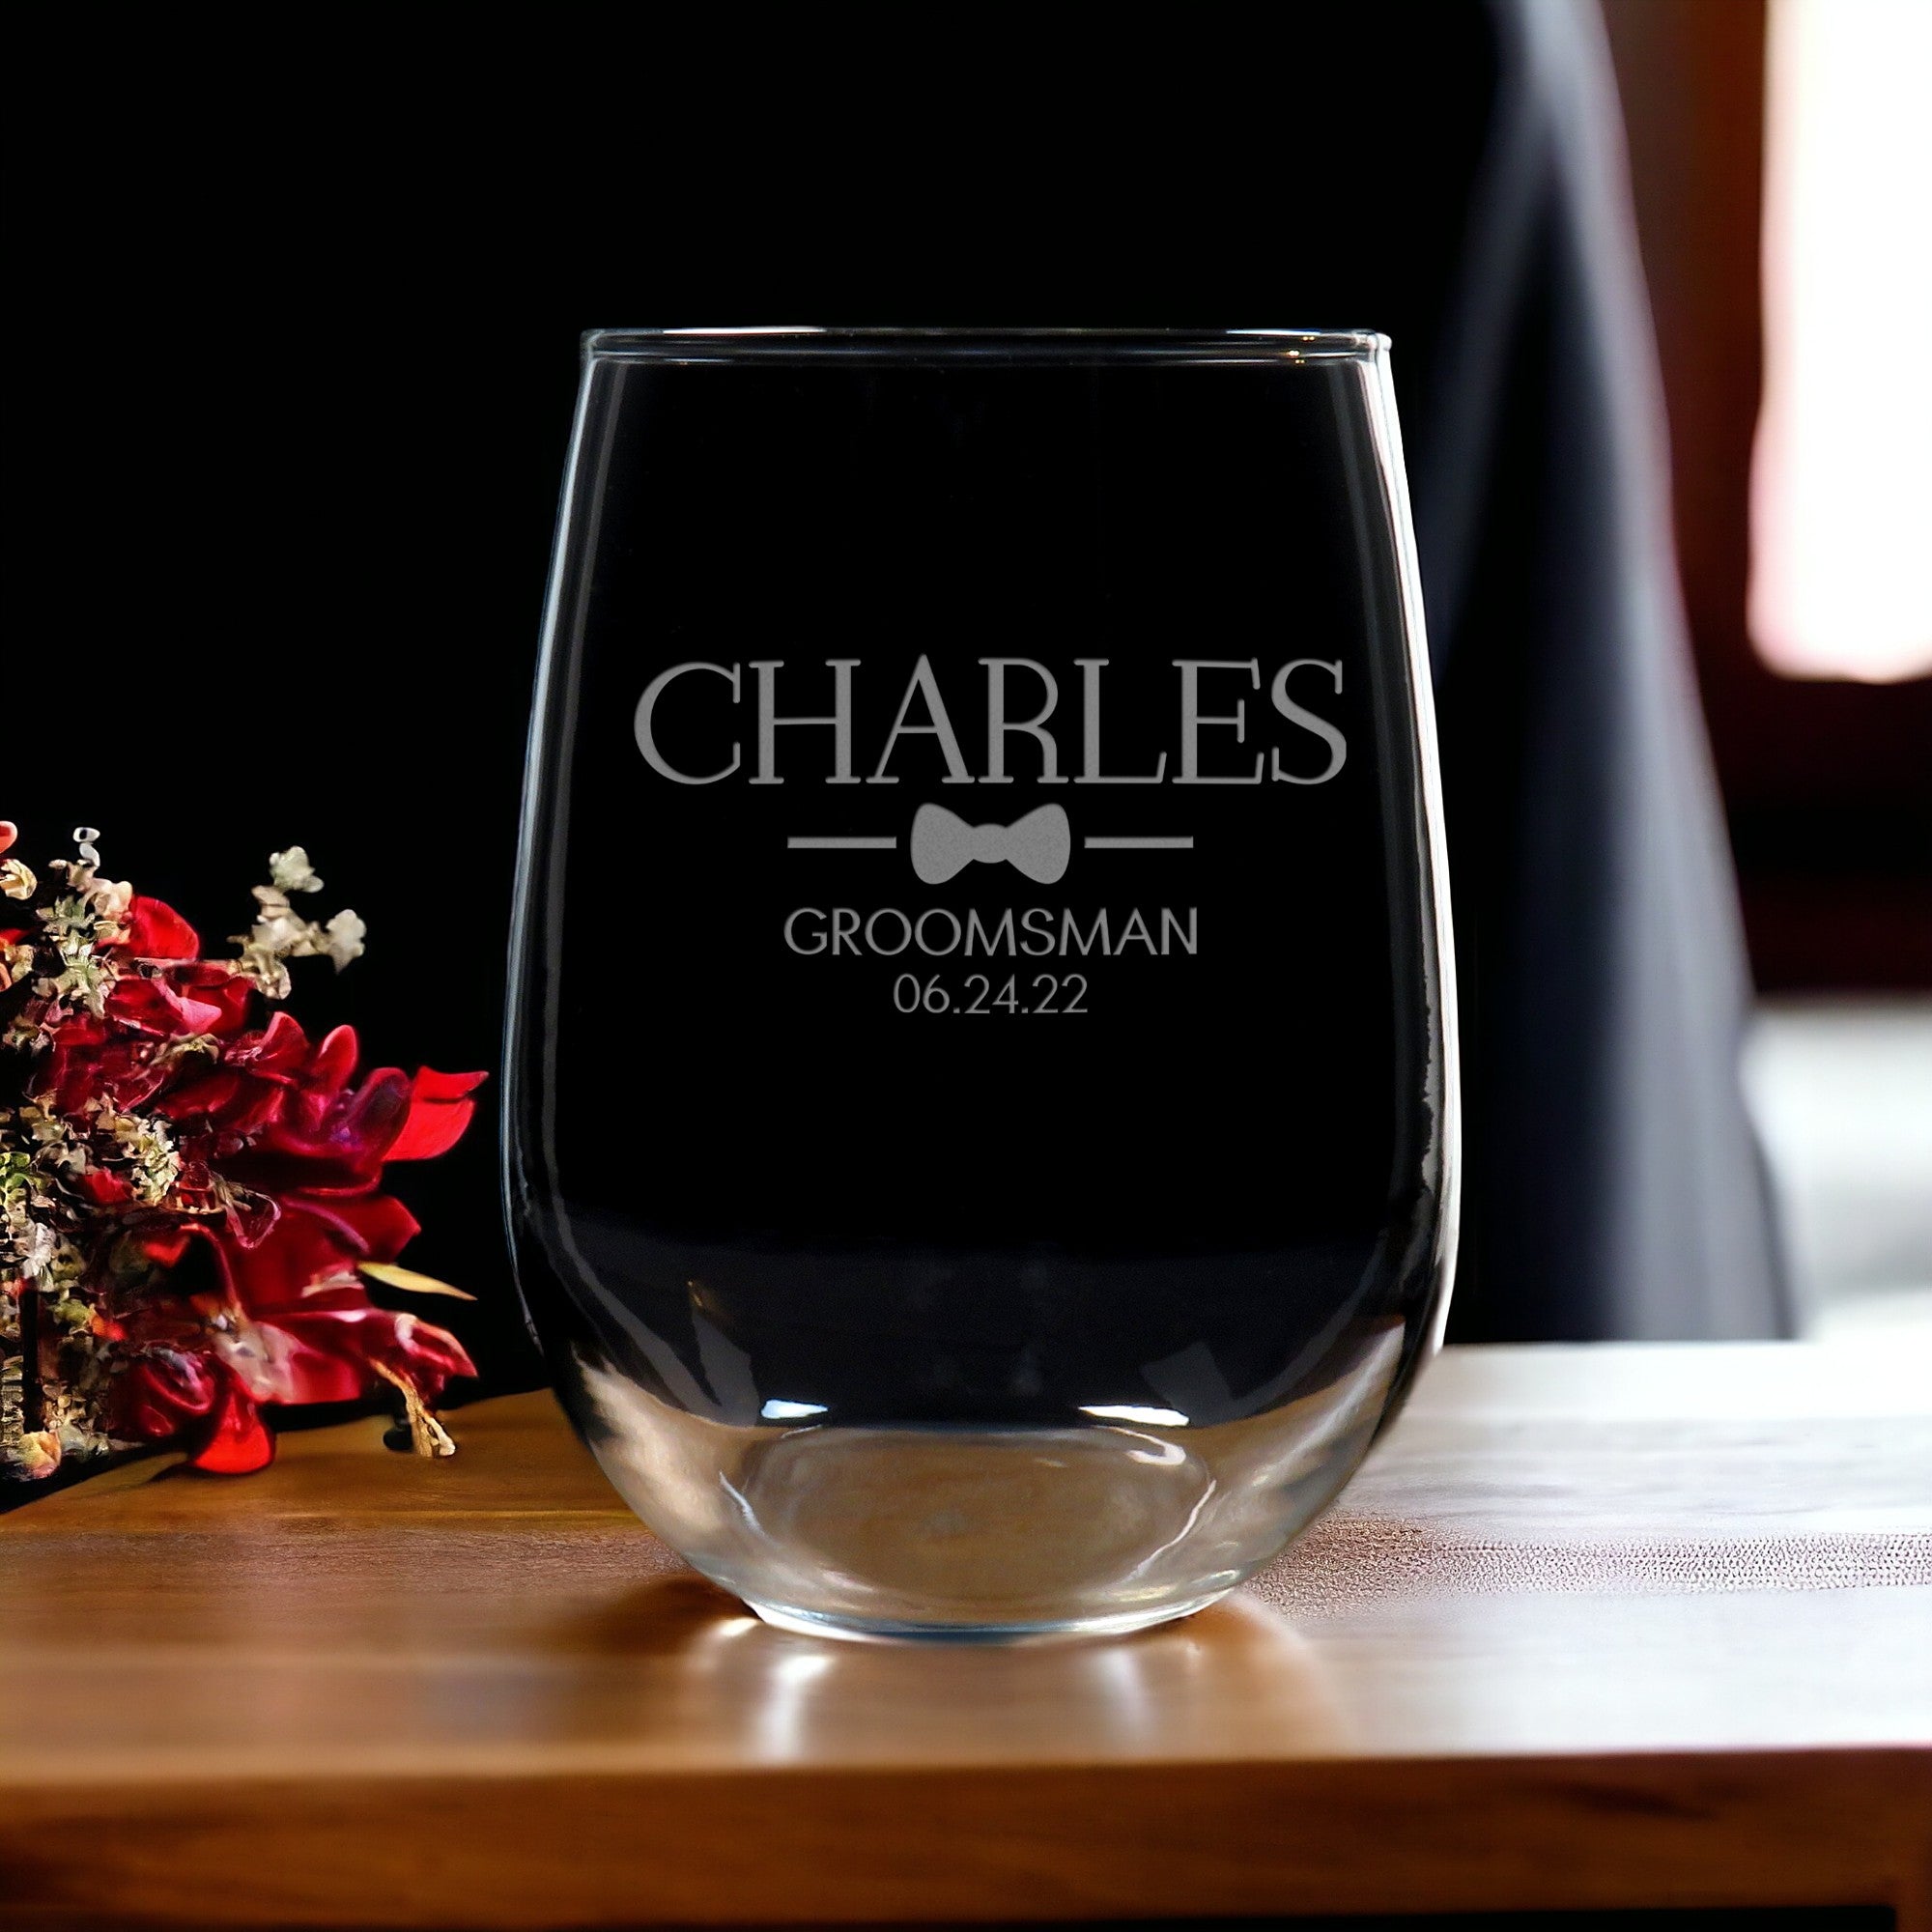 Groomsman Bow Tie 17ozStemless Wine Glass - Gift for Wedding Party - Sandblasted Customized Glass for Best Man, Groomsman, Father of the Bride and Groom, Sandblasted Customized Glass